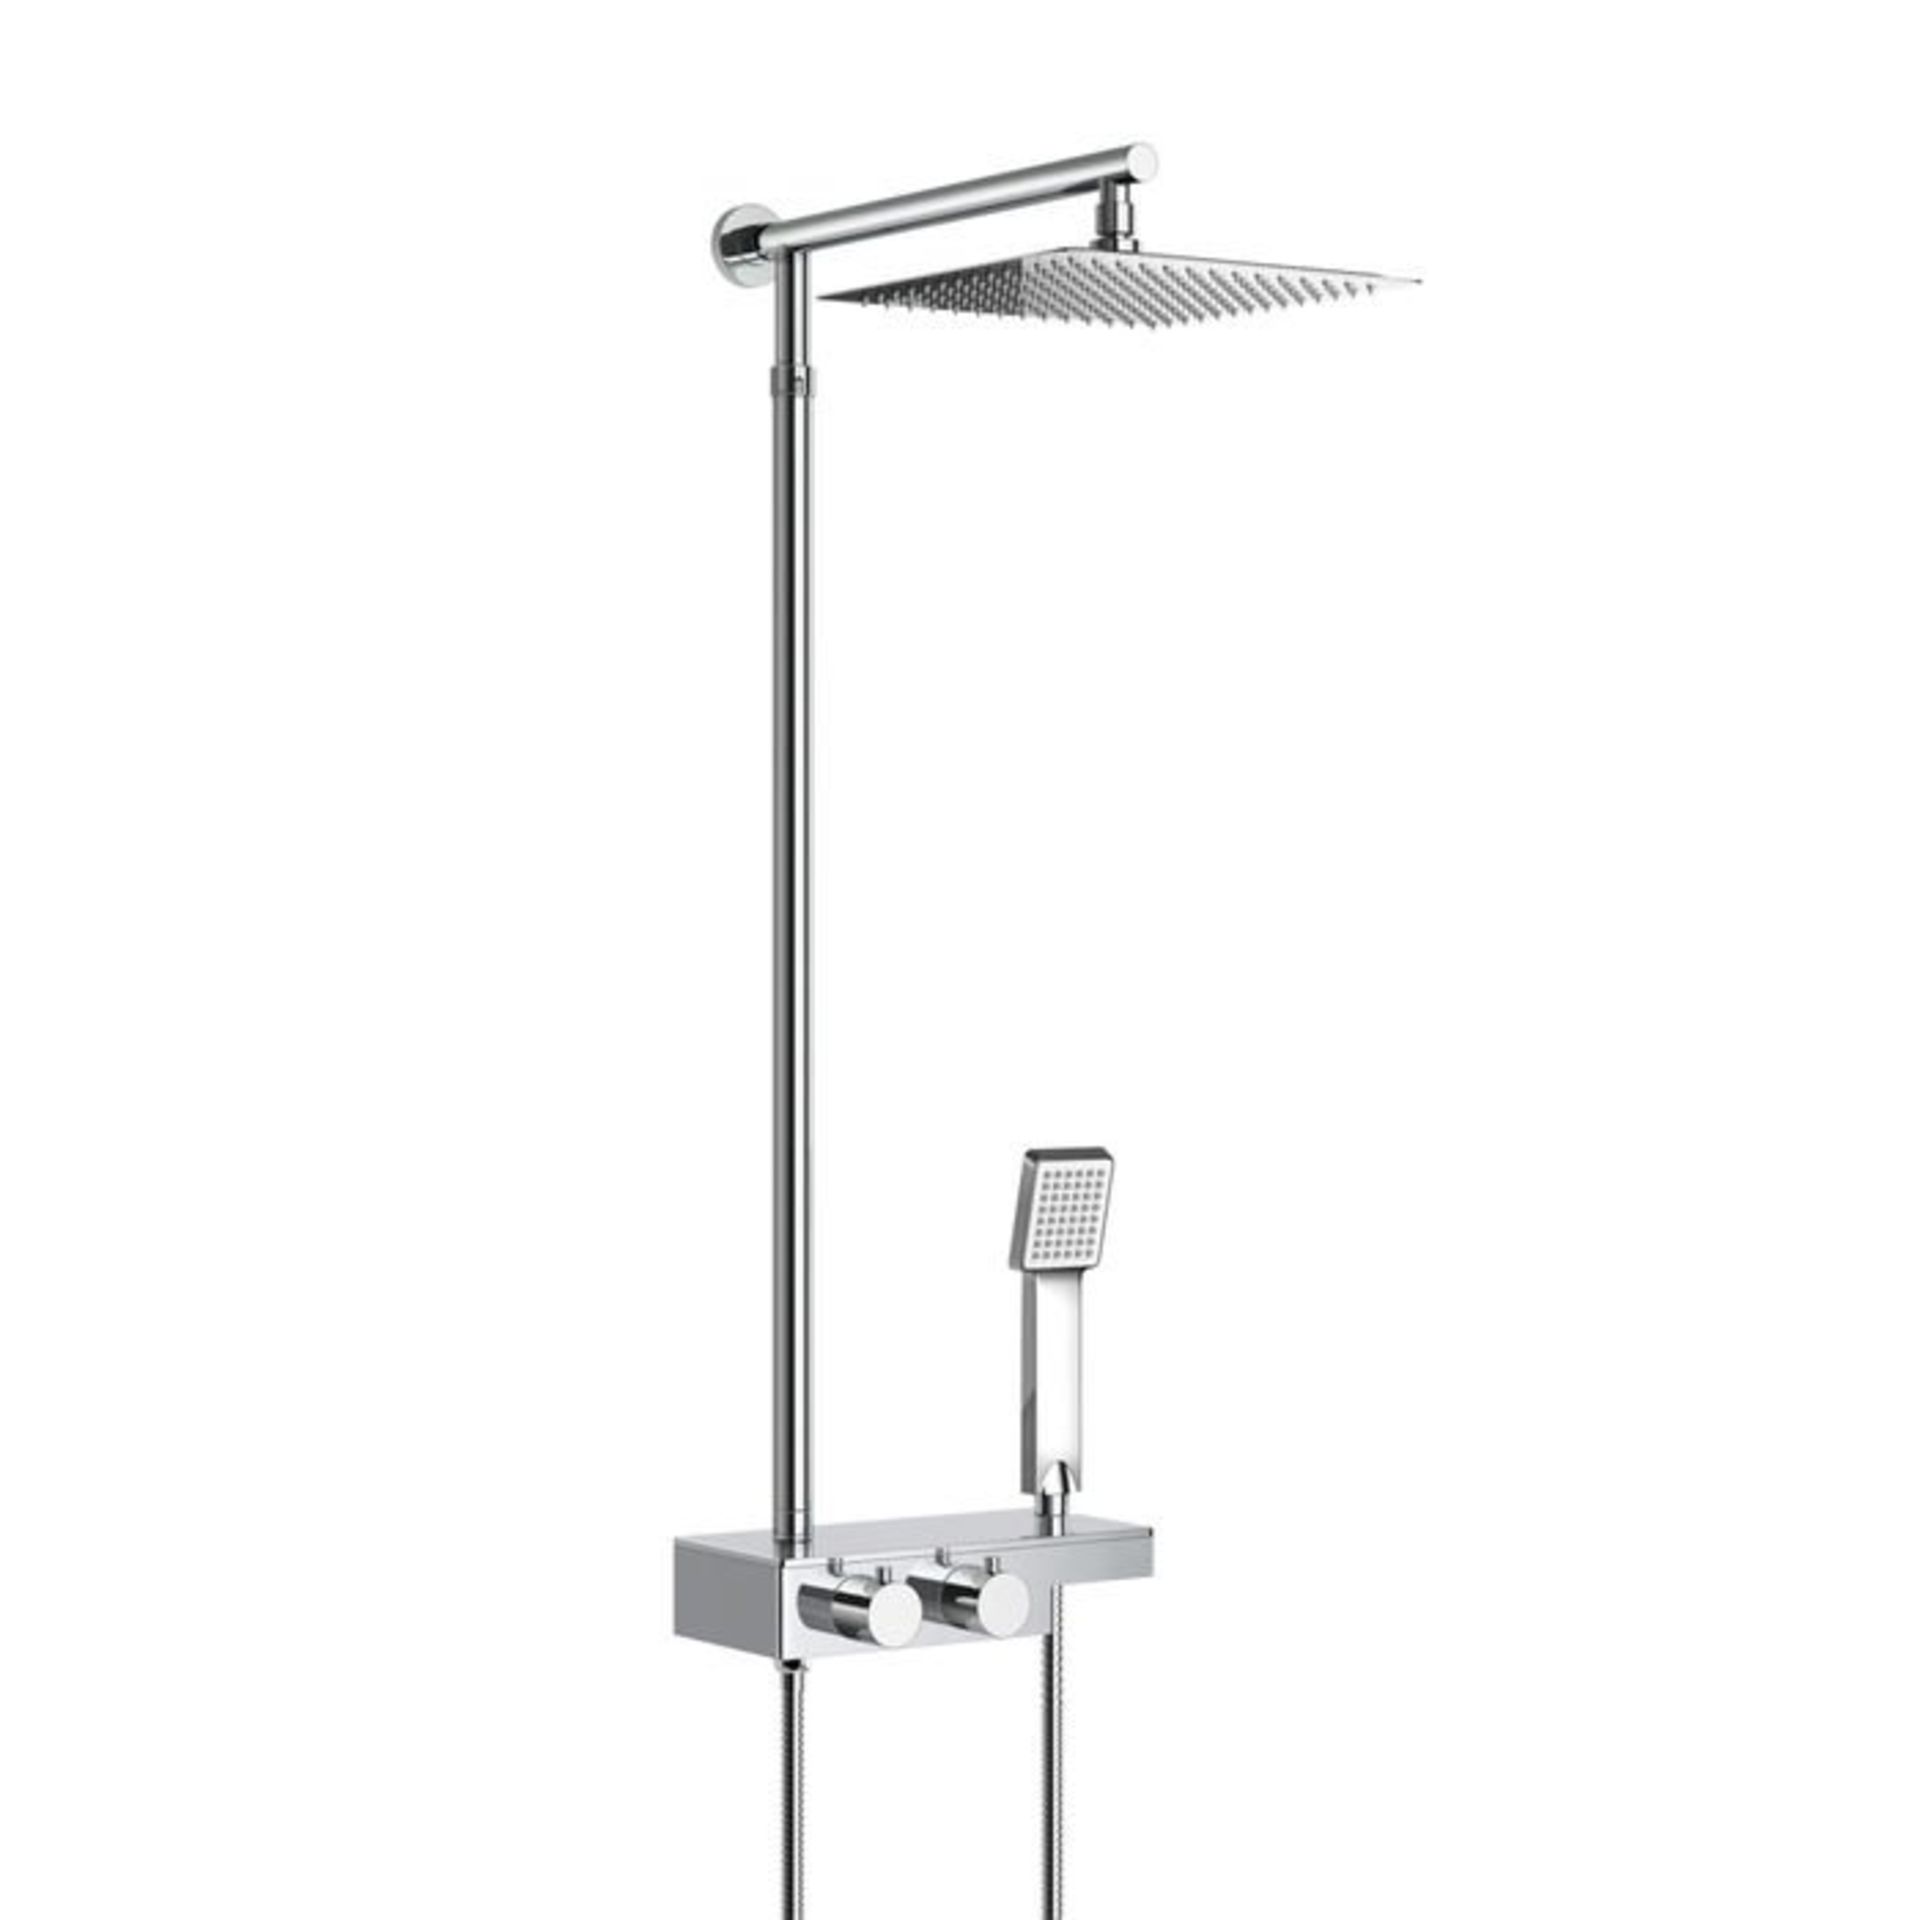 (Y157) Square Exposed Thermostatic Shower Shelf, Kit & Large Head. RRP £349.99. Style meets function - Image 6 of 6